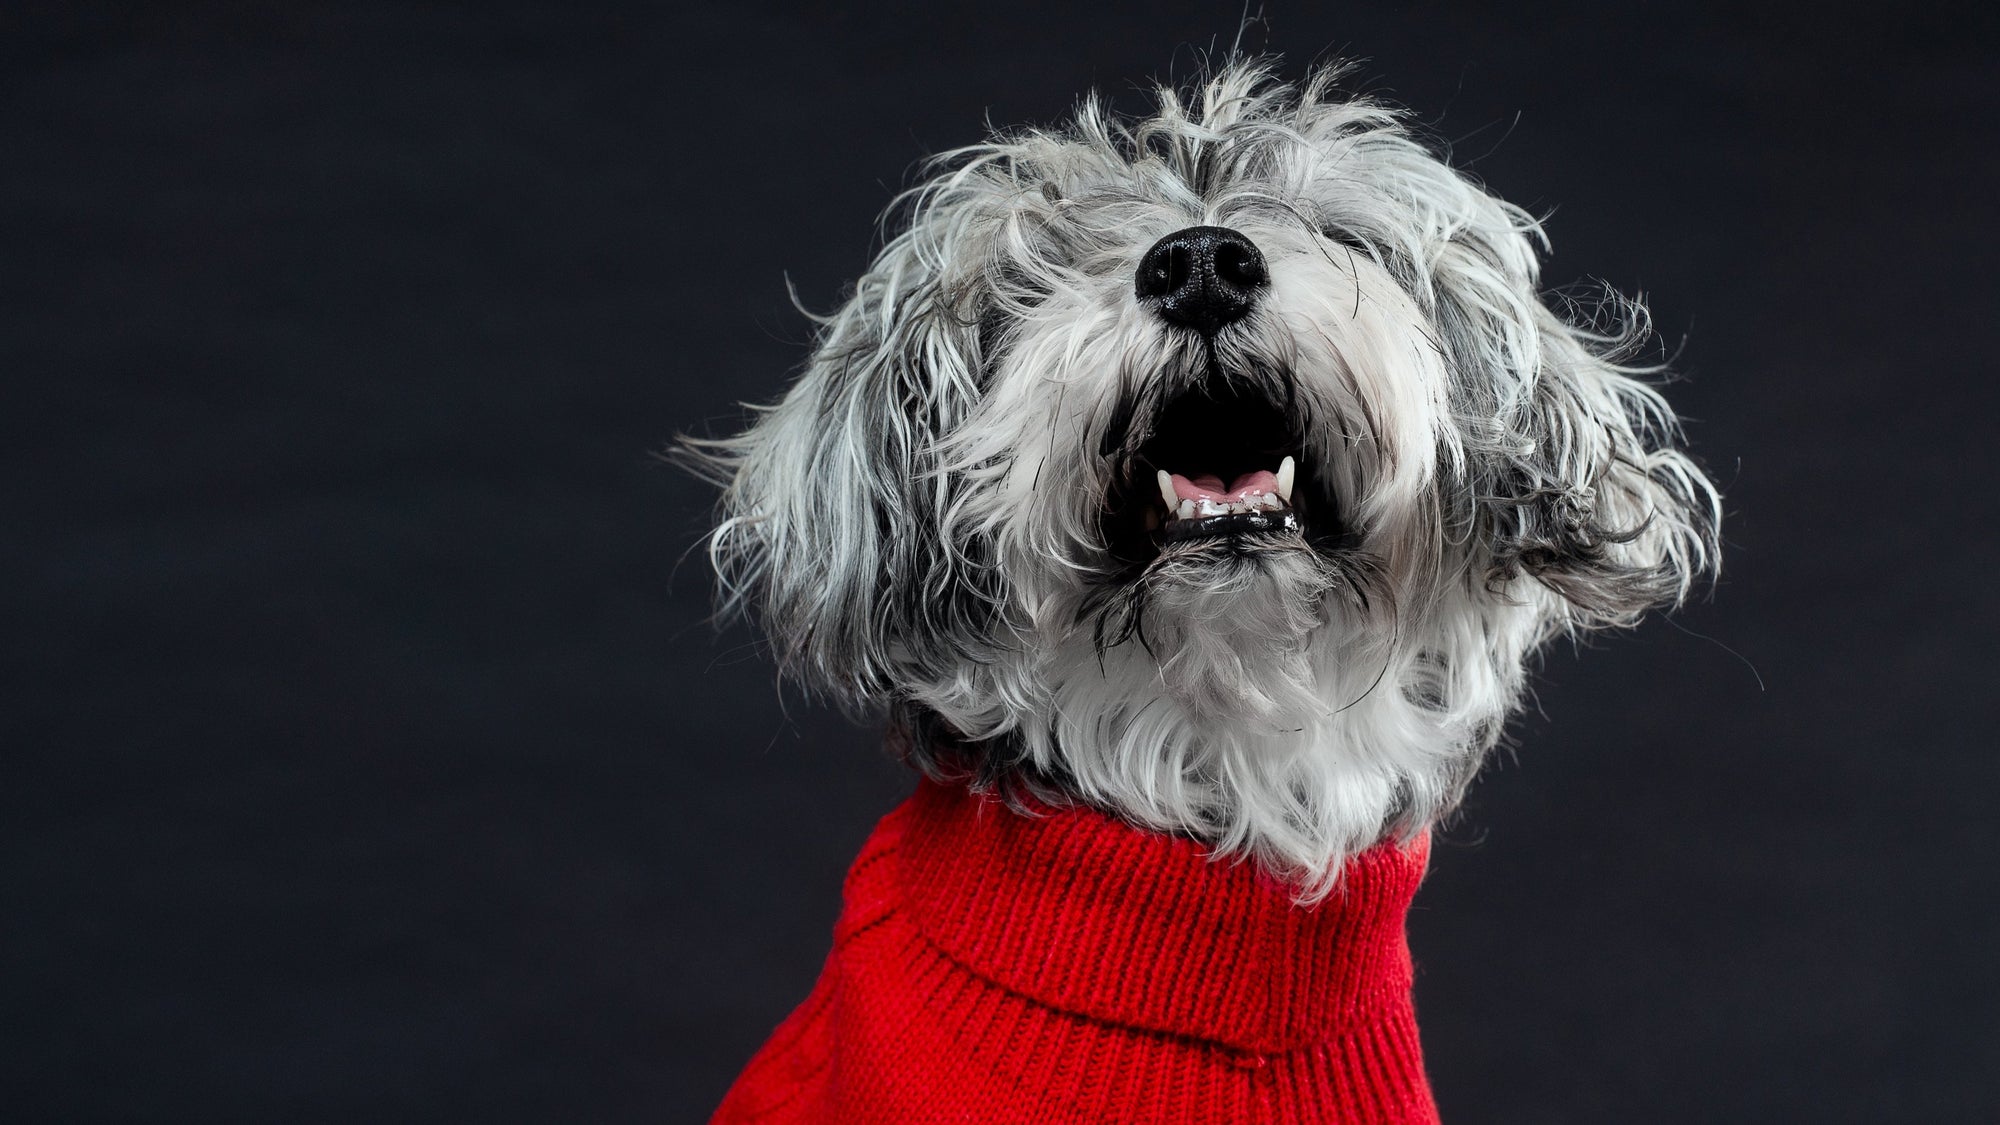 Posh Dog Life features stylish dog apparel to suit every occasion for your pup, from PJs for everyday wear, to elegant dresses, formal party attire, tuxedos and ties for special celebrations.